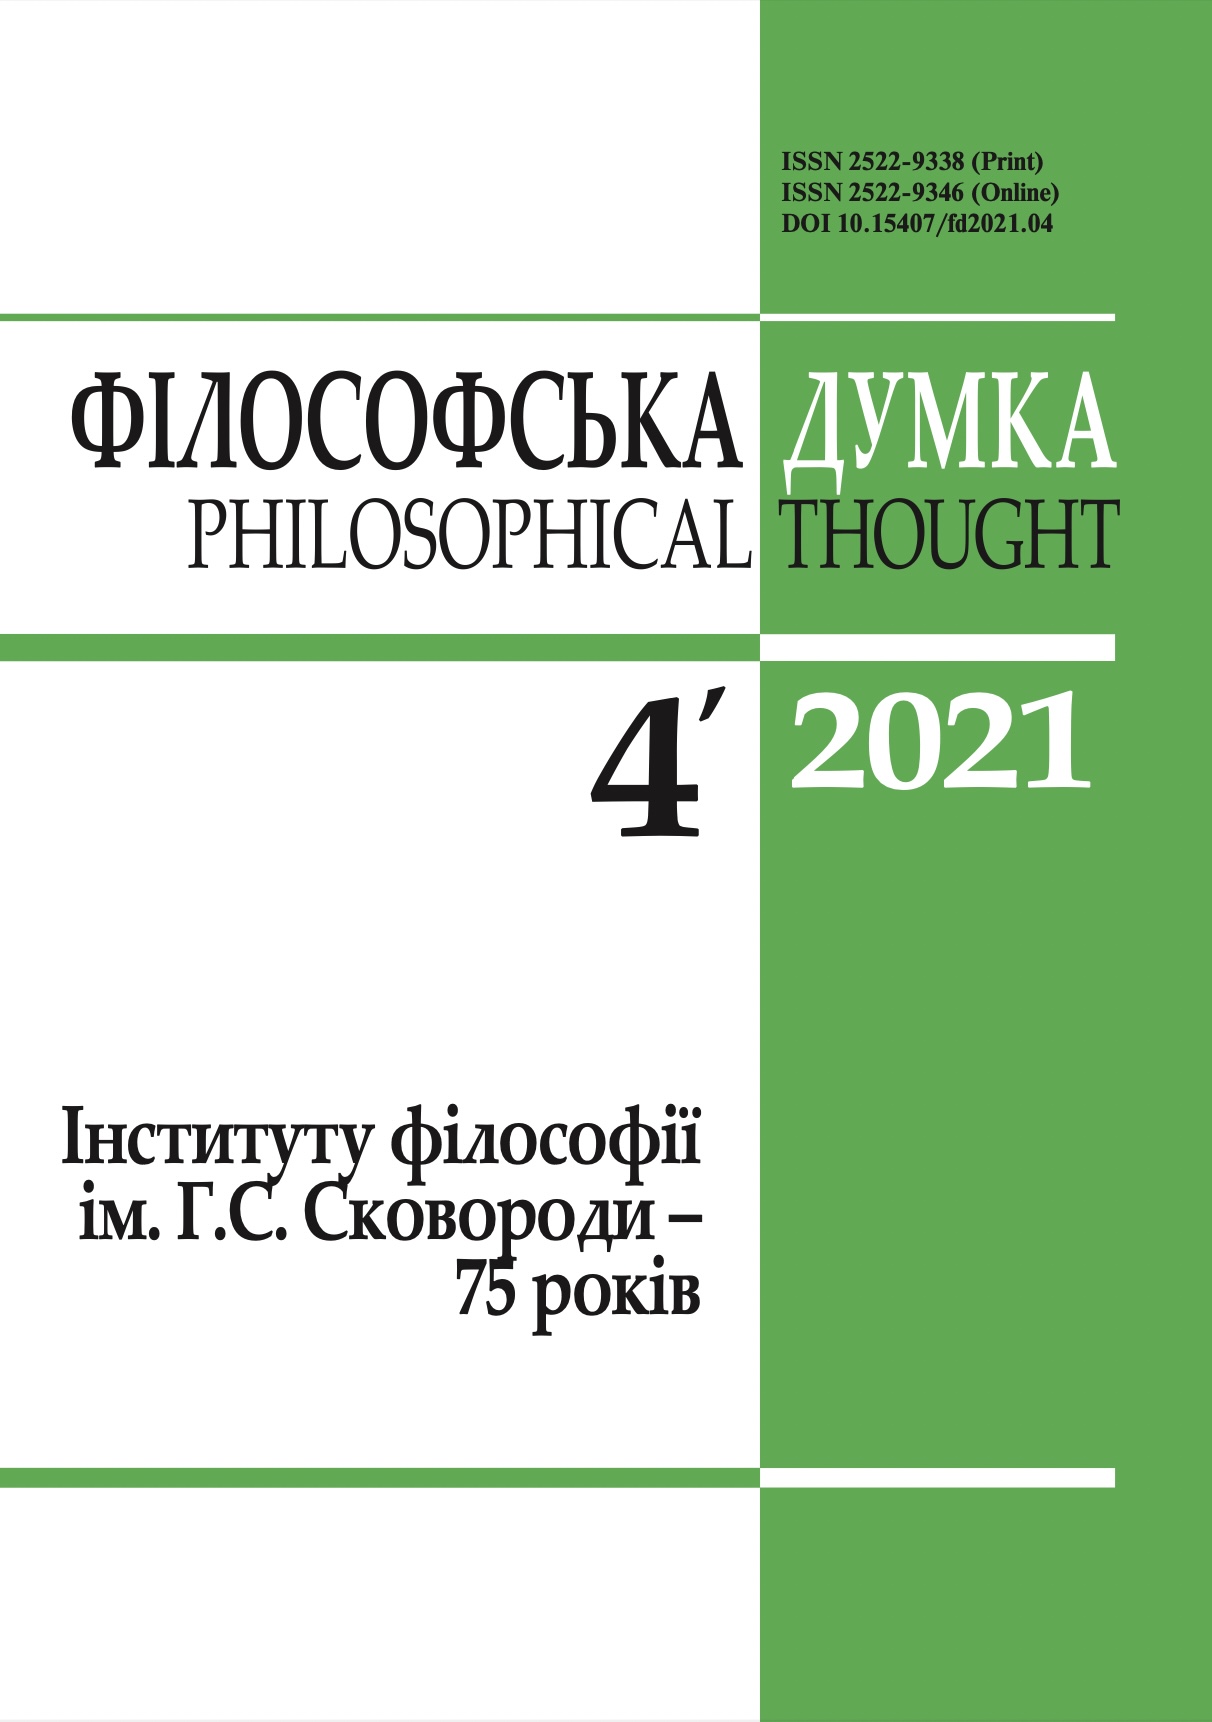 					View No. 4 (2021): Philosophical thought
				